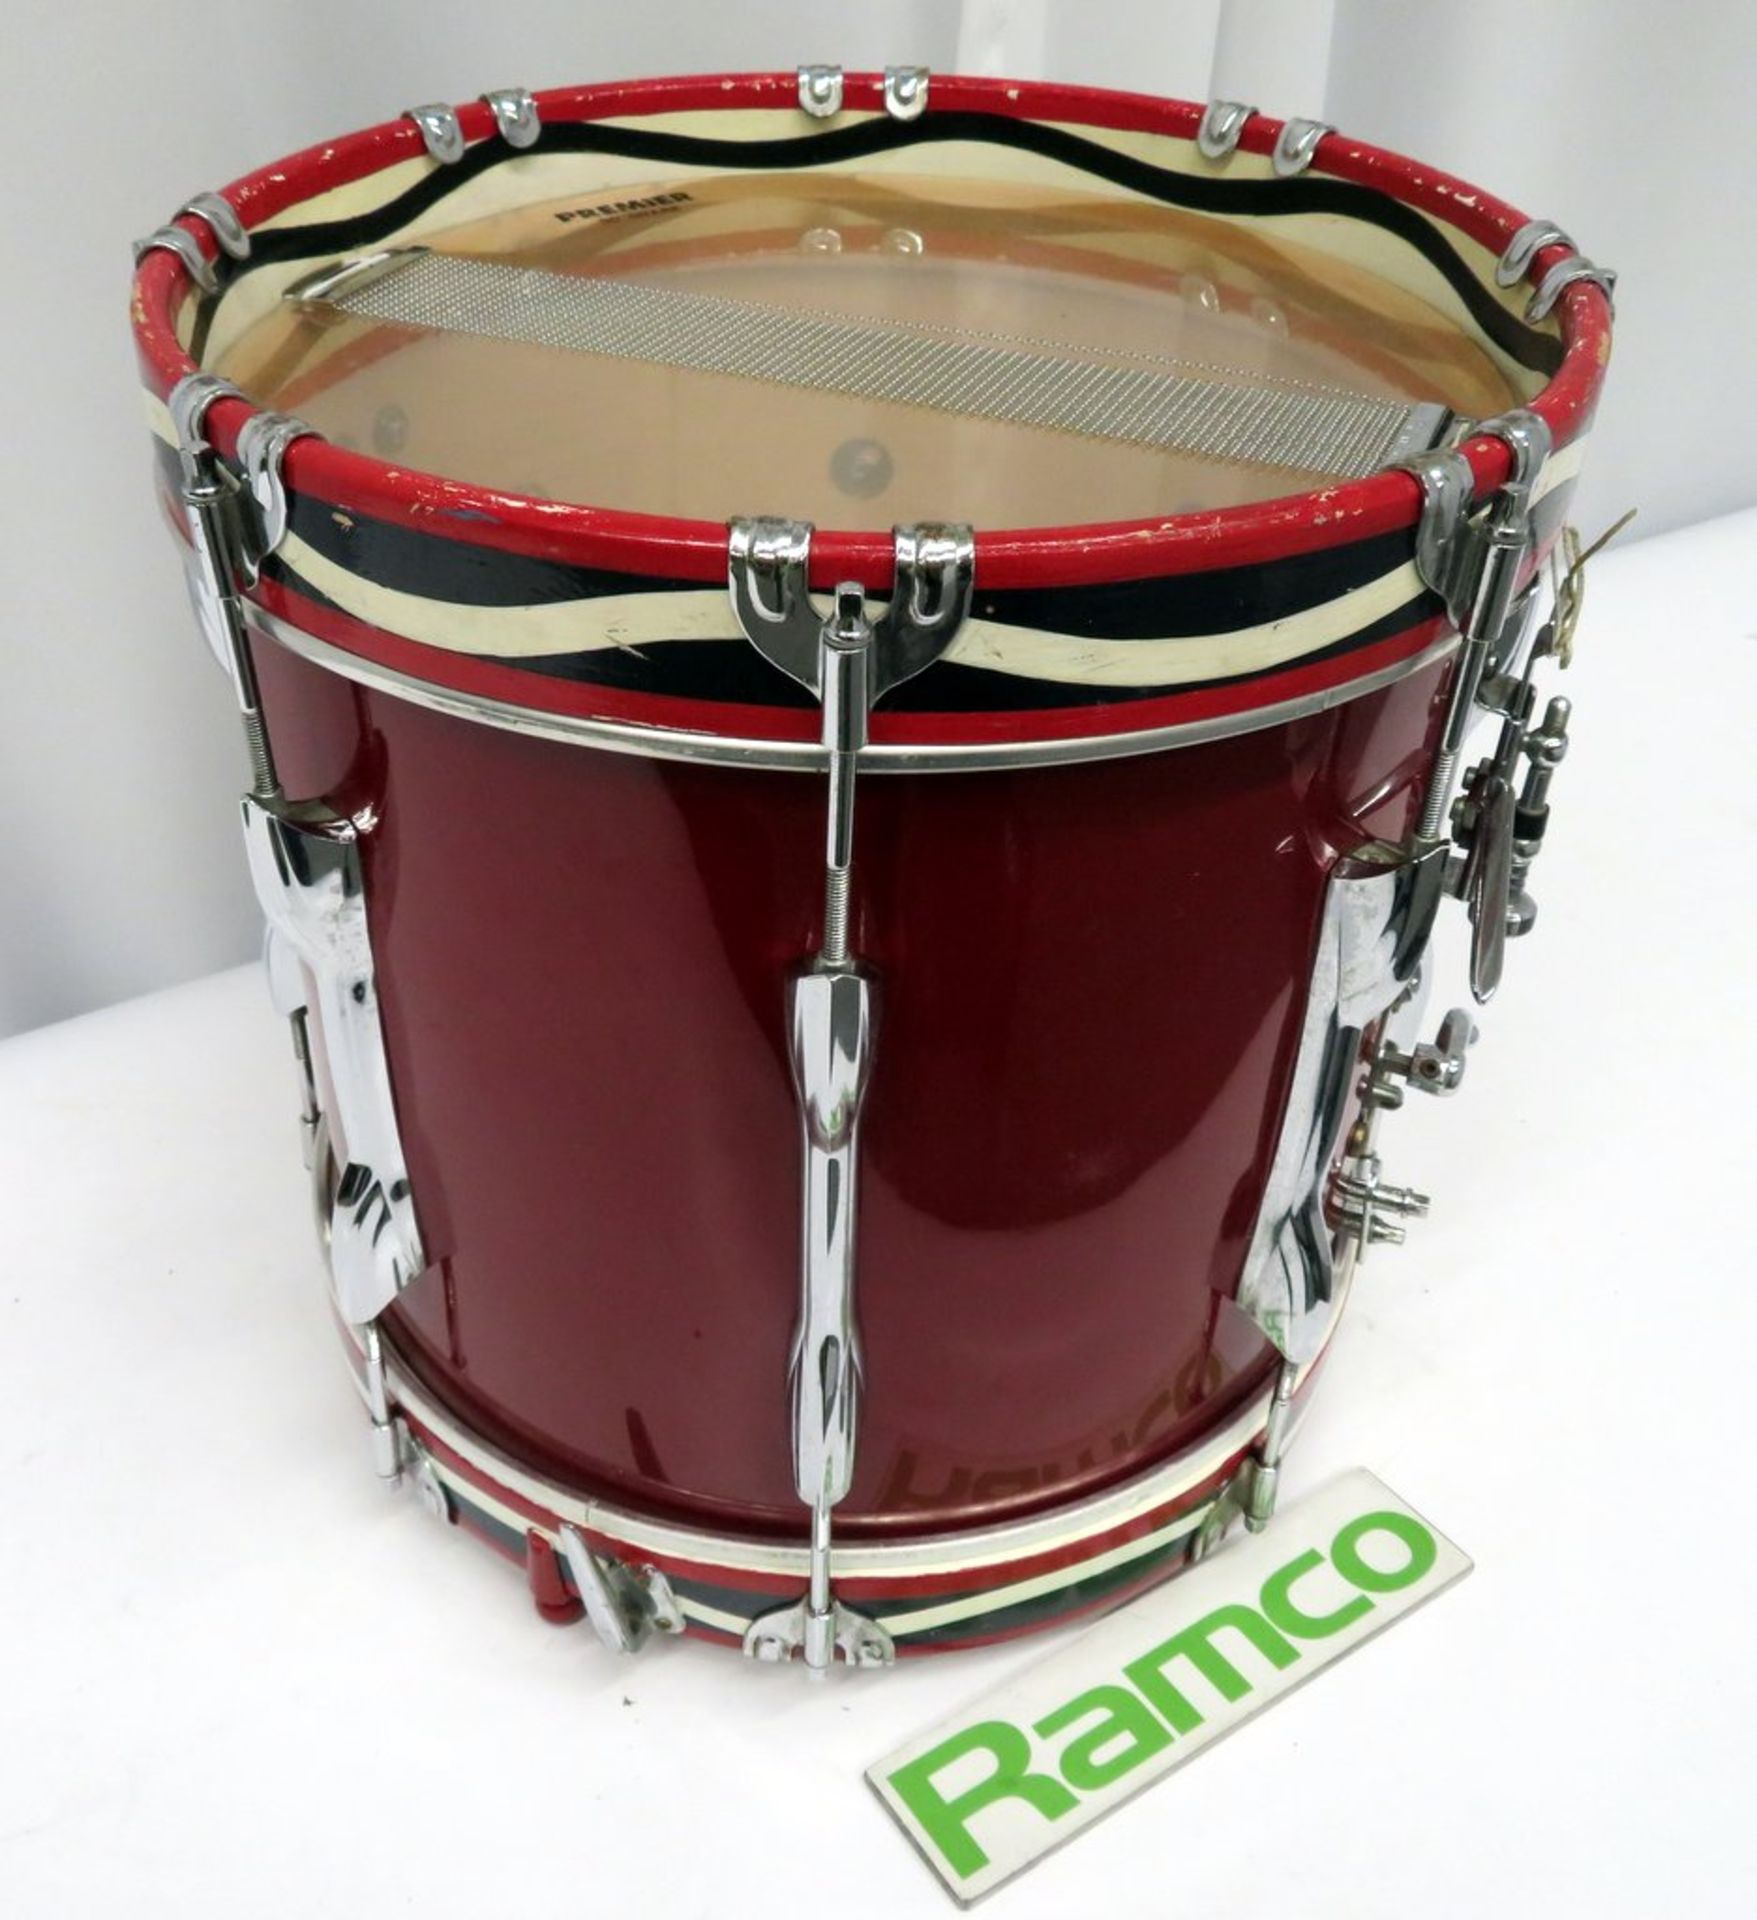 Premier Side Marching Snare Drum. - Image 7 of 8